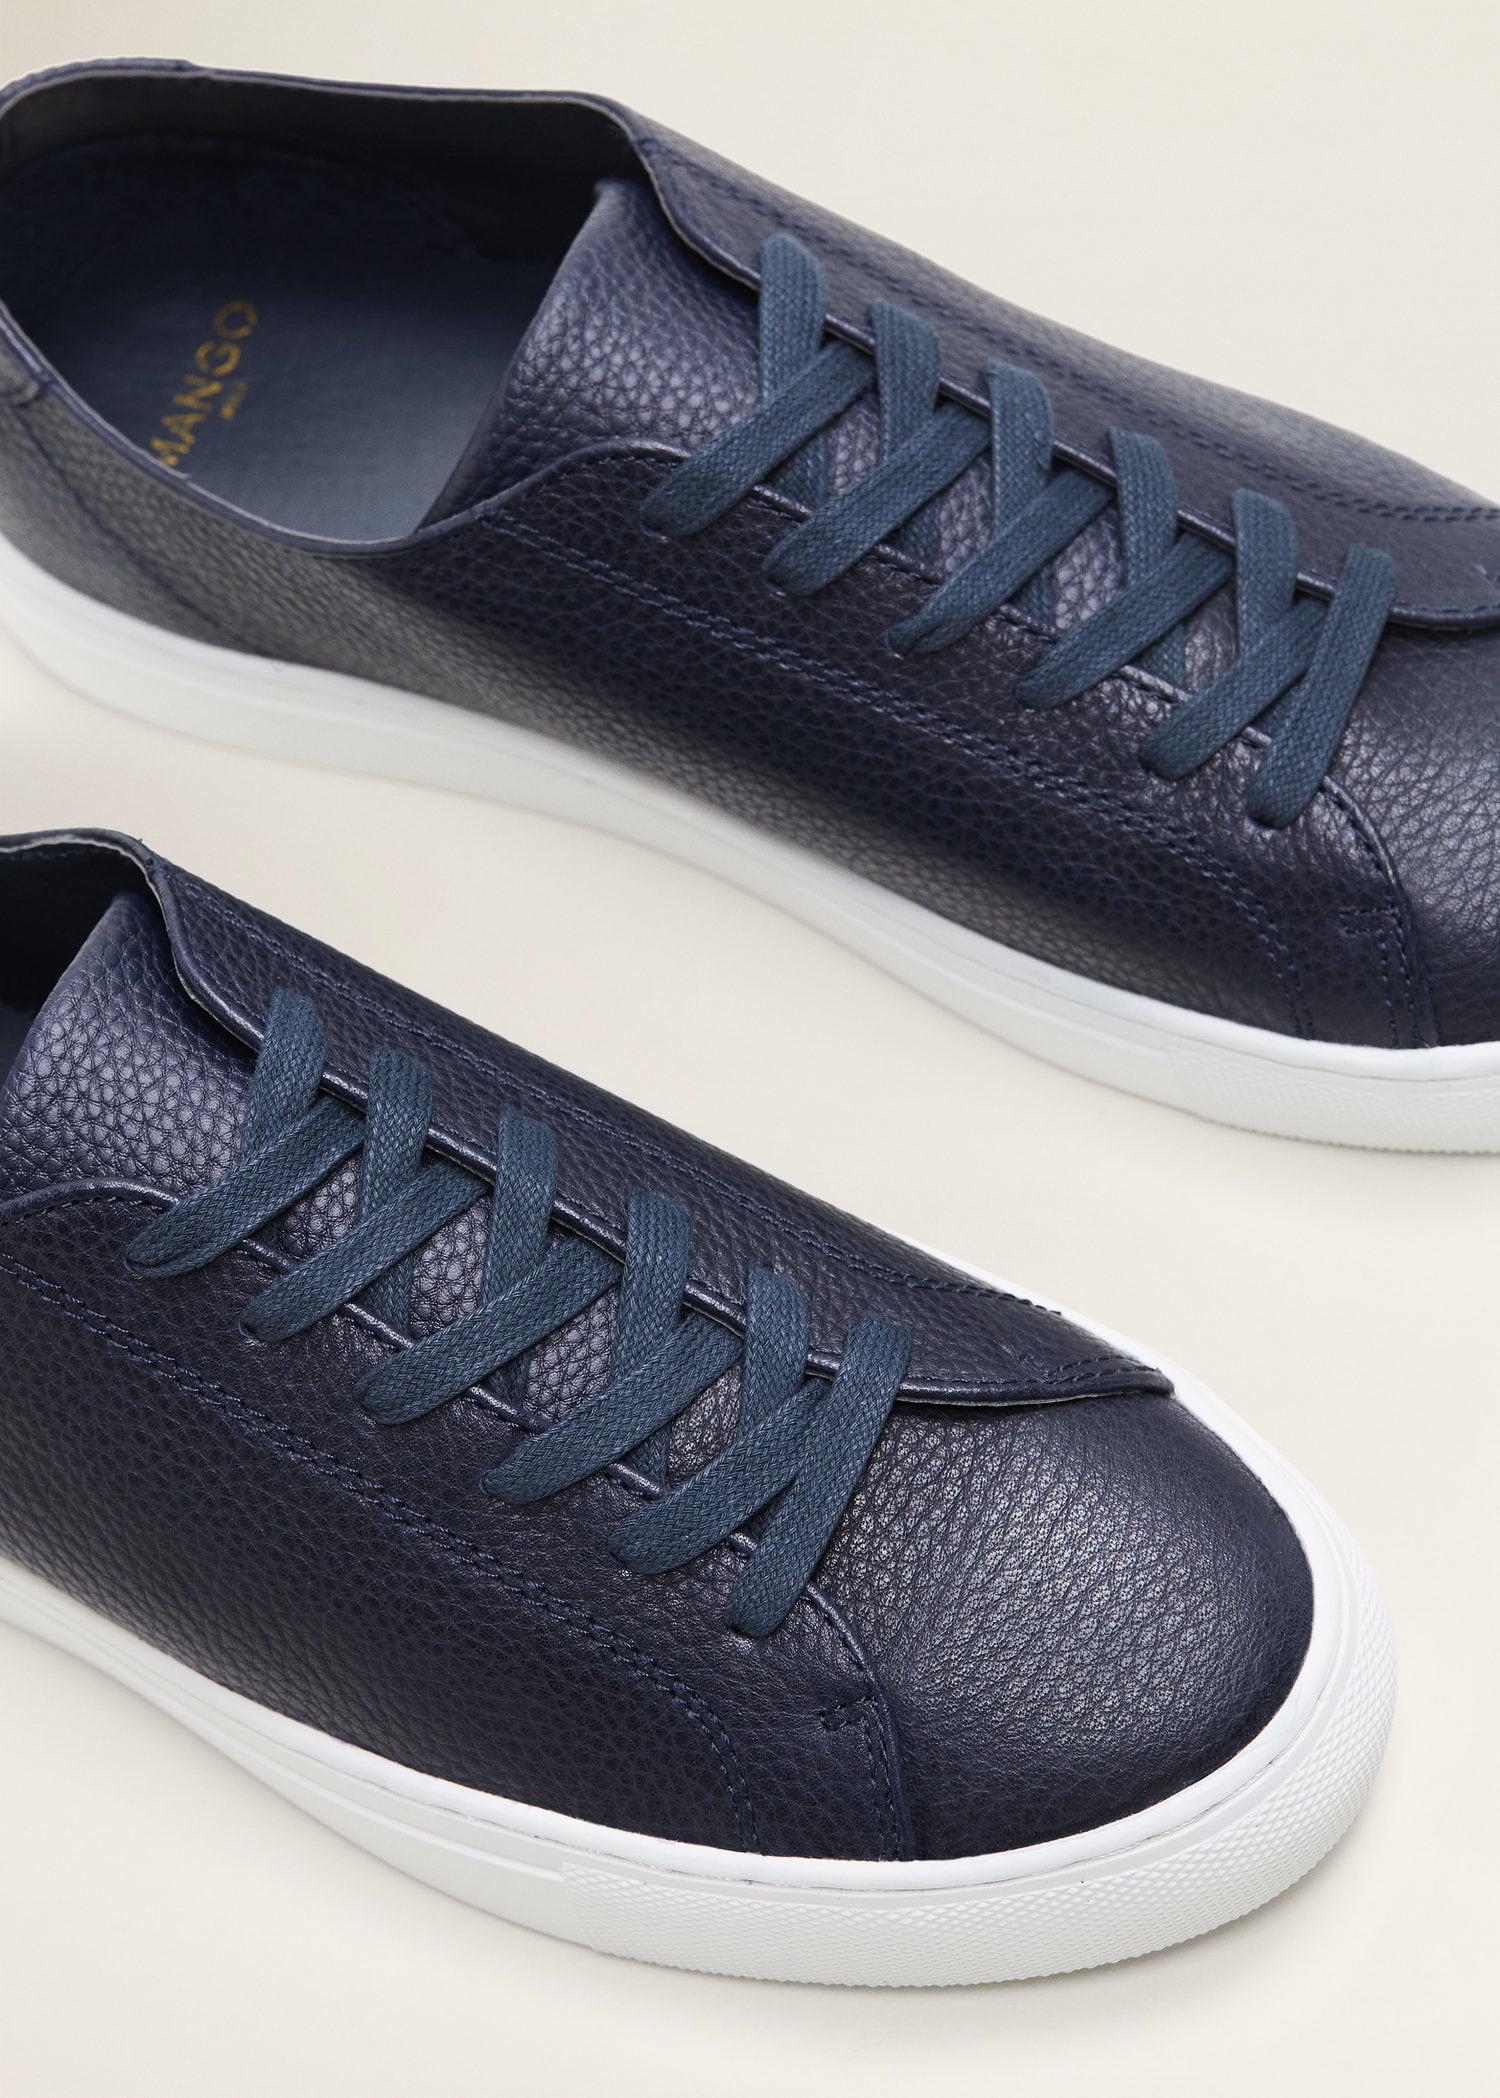 Mango Pebbled Leather Sneakers in Dark Navy (Blue) for Men - Lyst